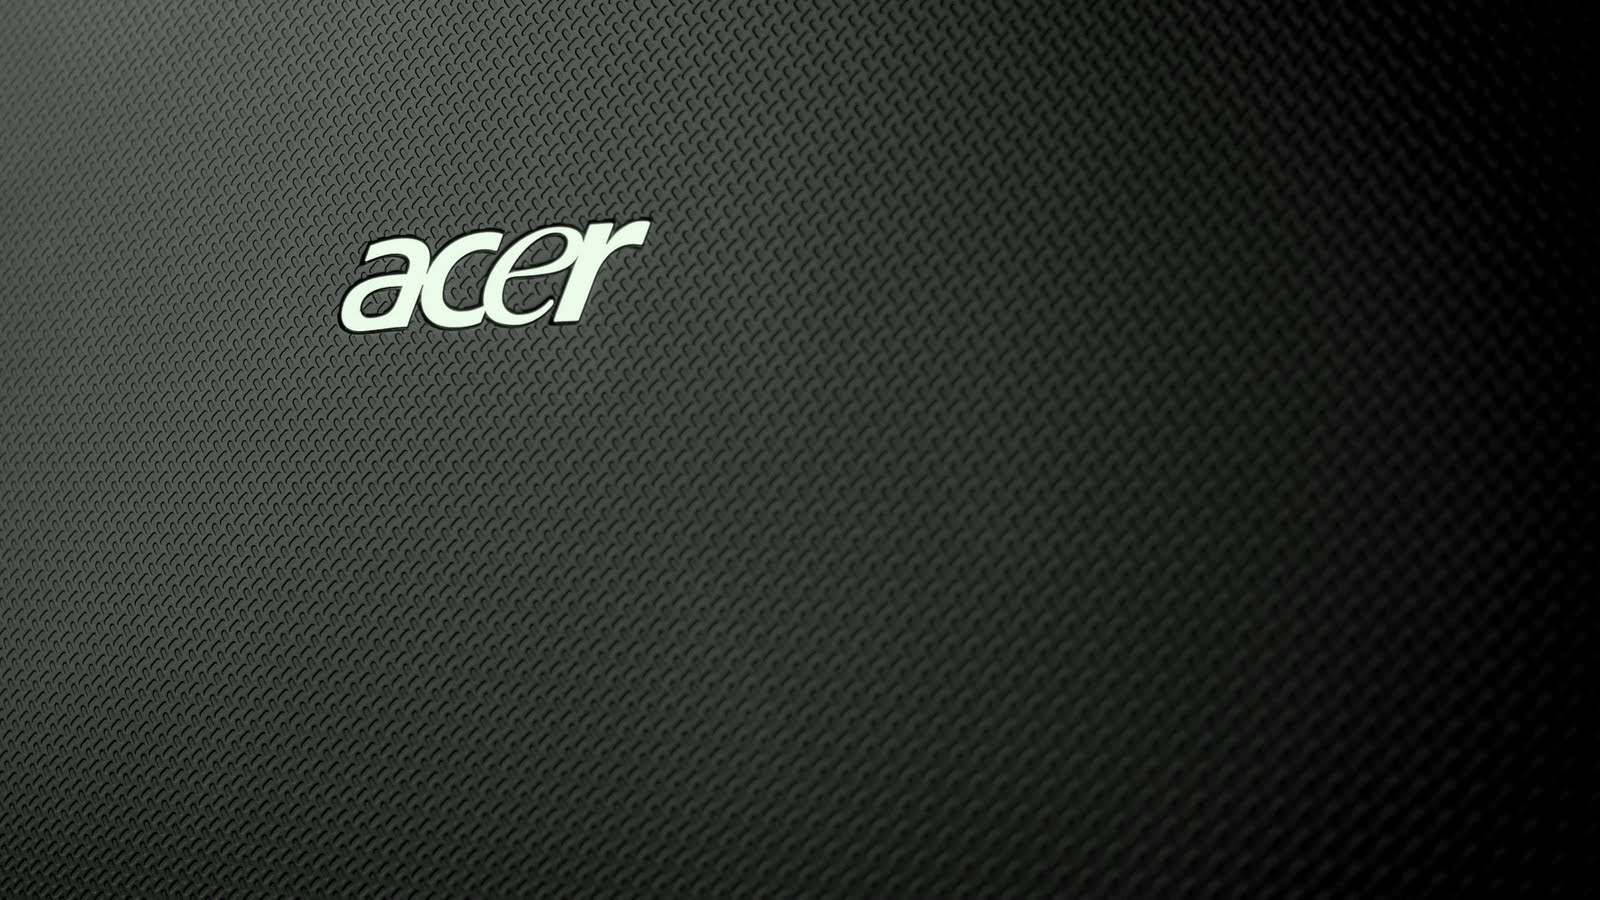 Acer Wallpapers 27 1600 X 900